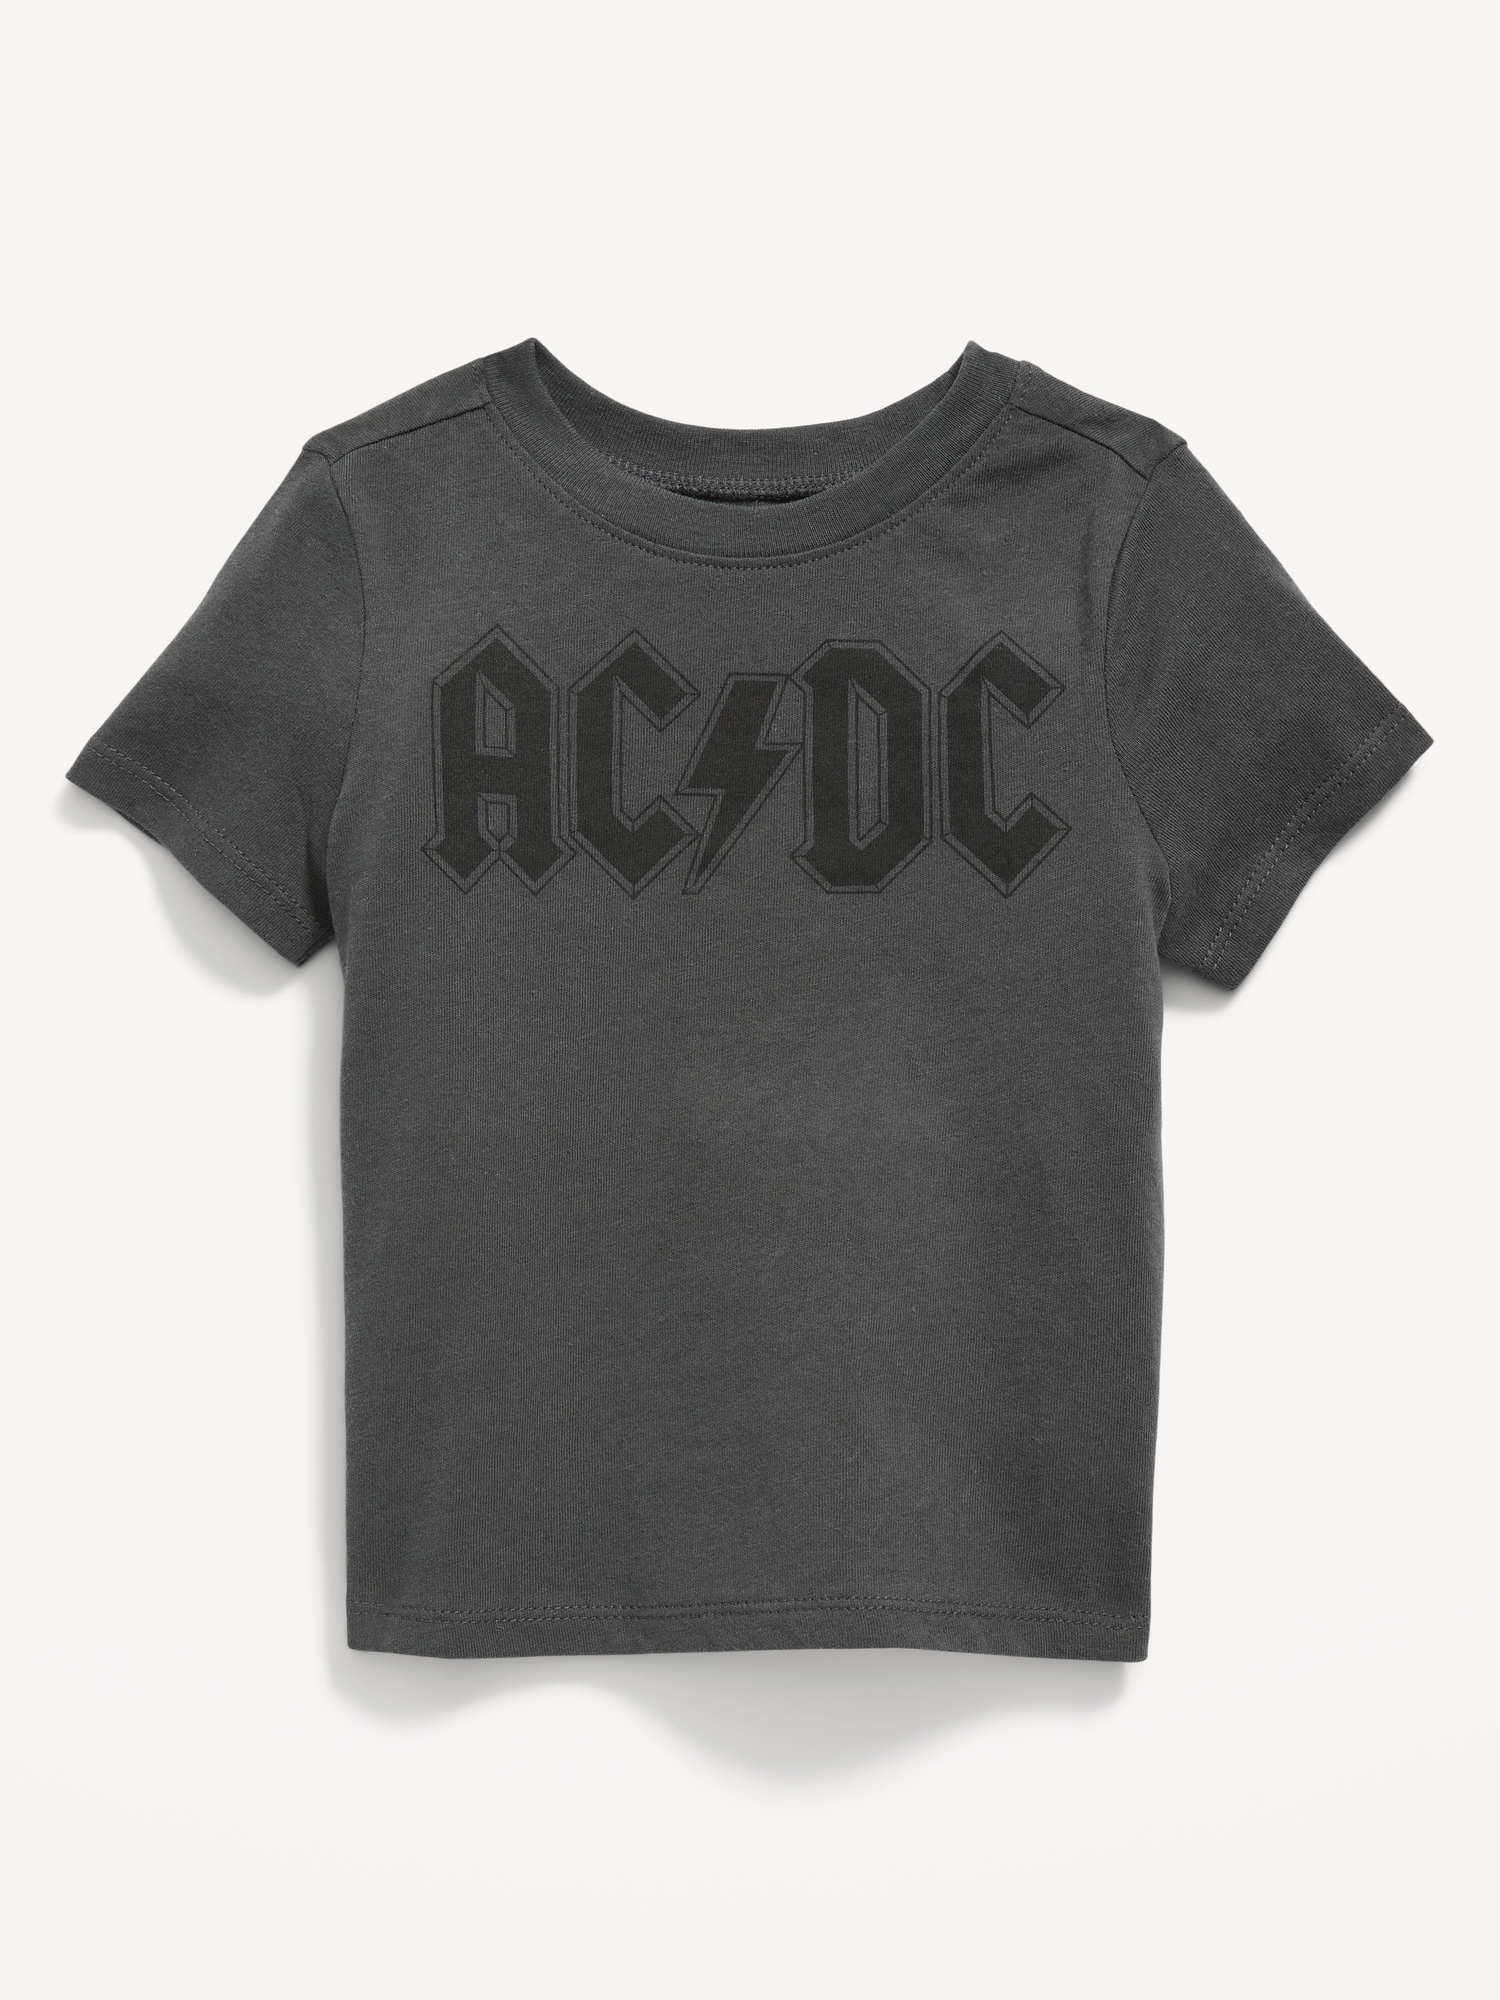 AC DC Mens Size Small Black Short Sleeved T Shirt Tee Band